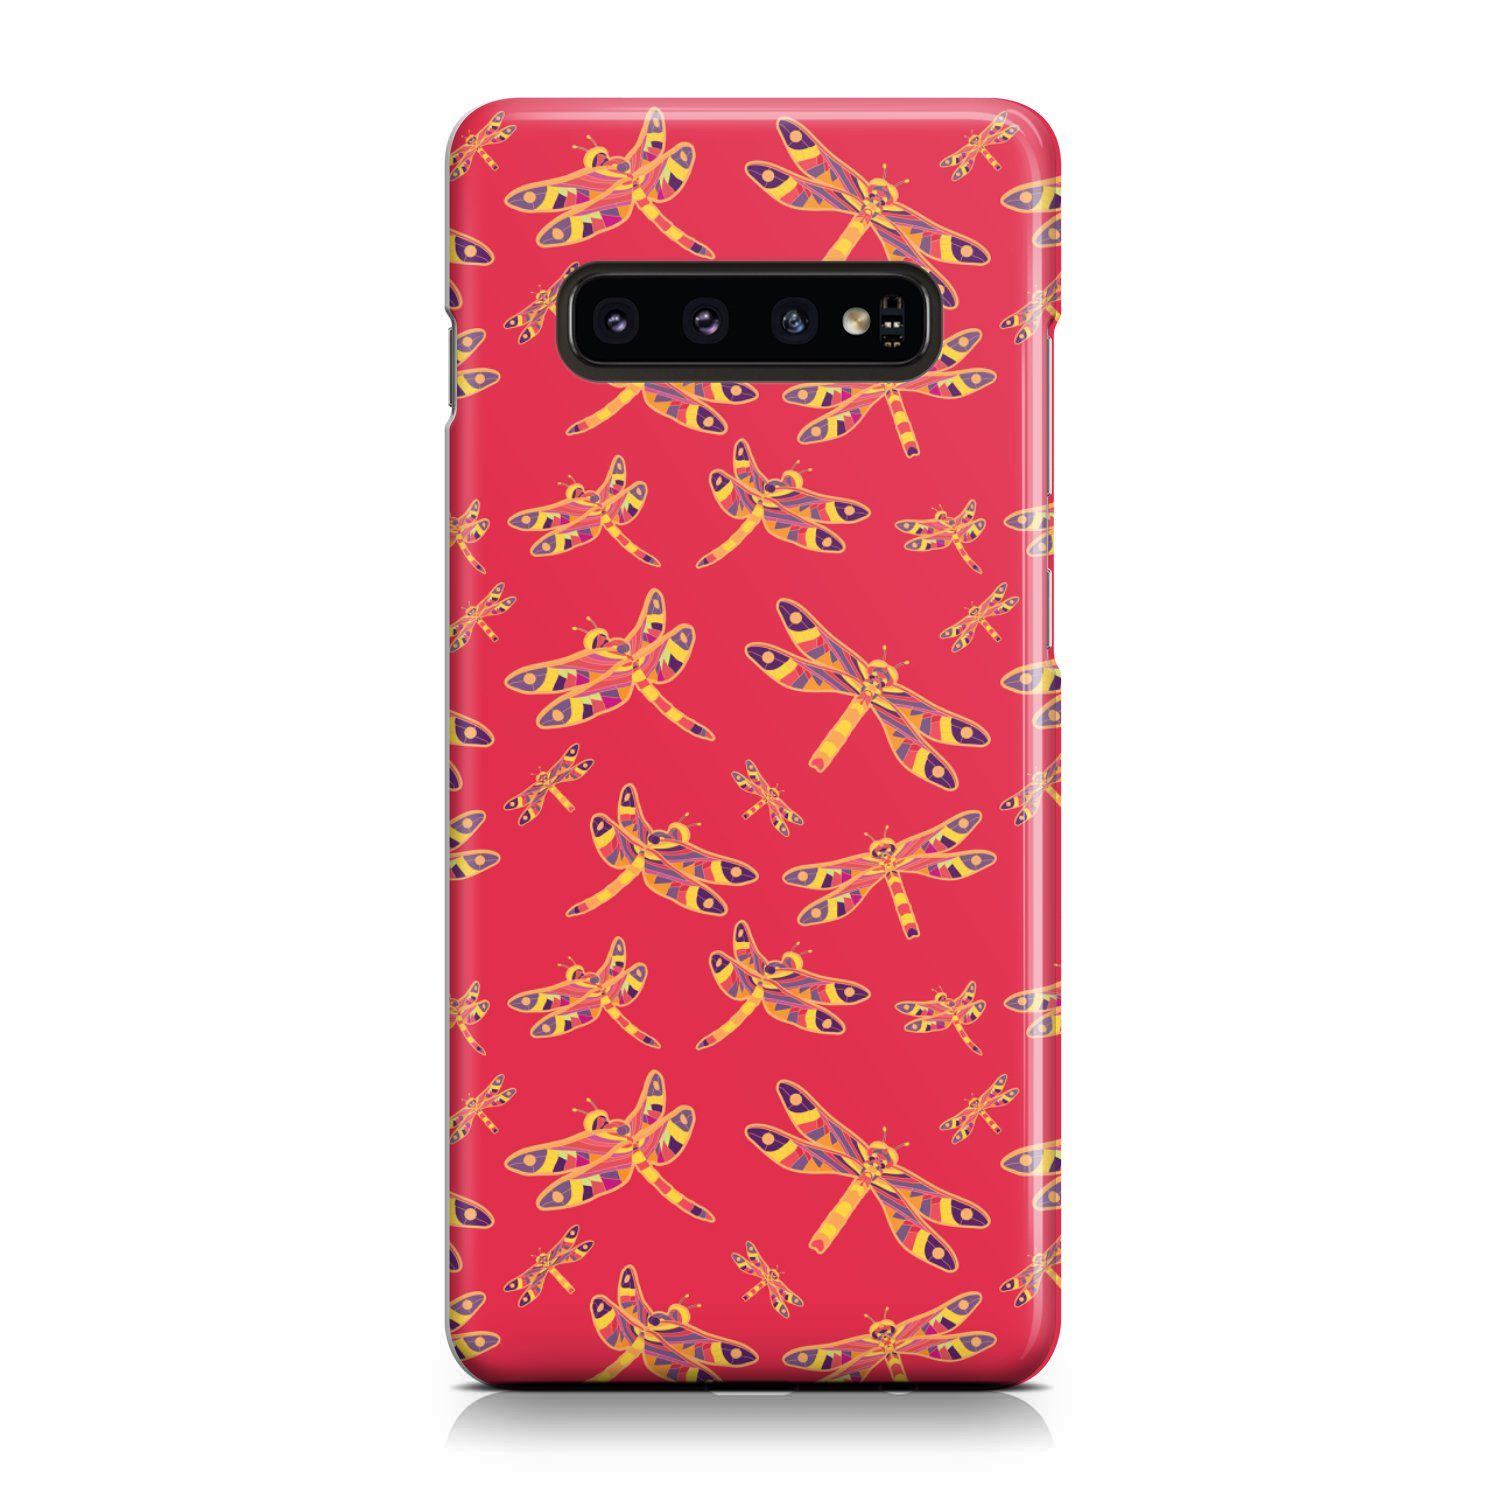 Gathering Rouge Phone Case Phone Case wc-fulfillment Samsung Galaxy S10 